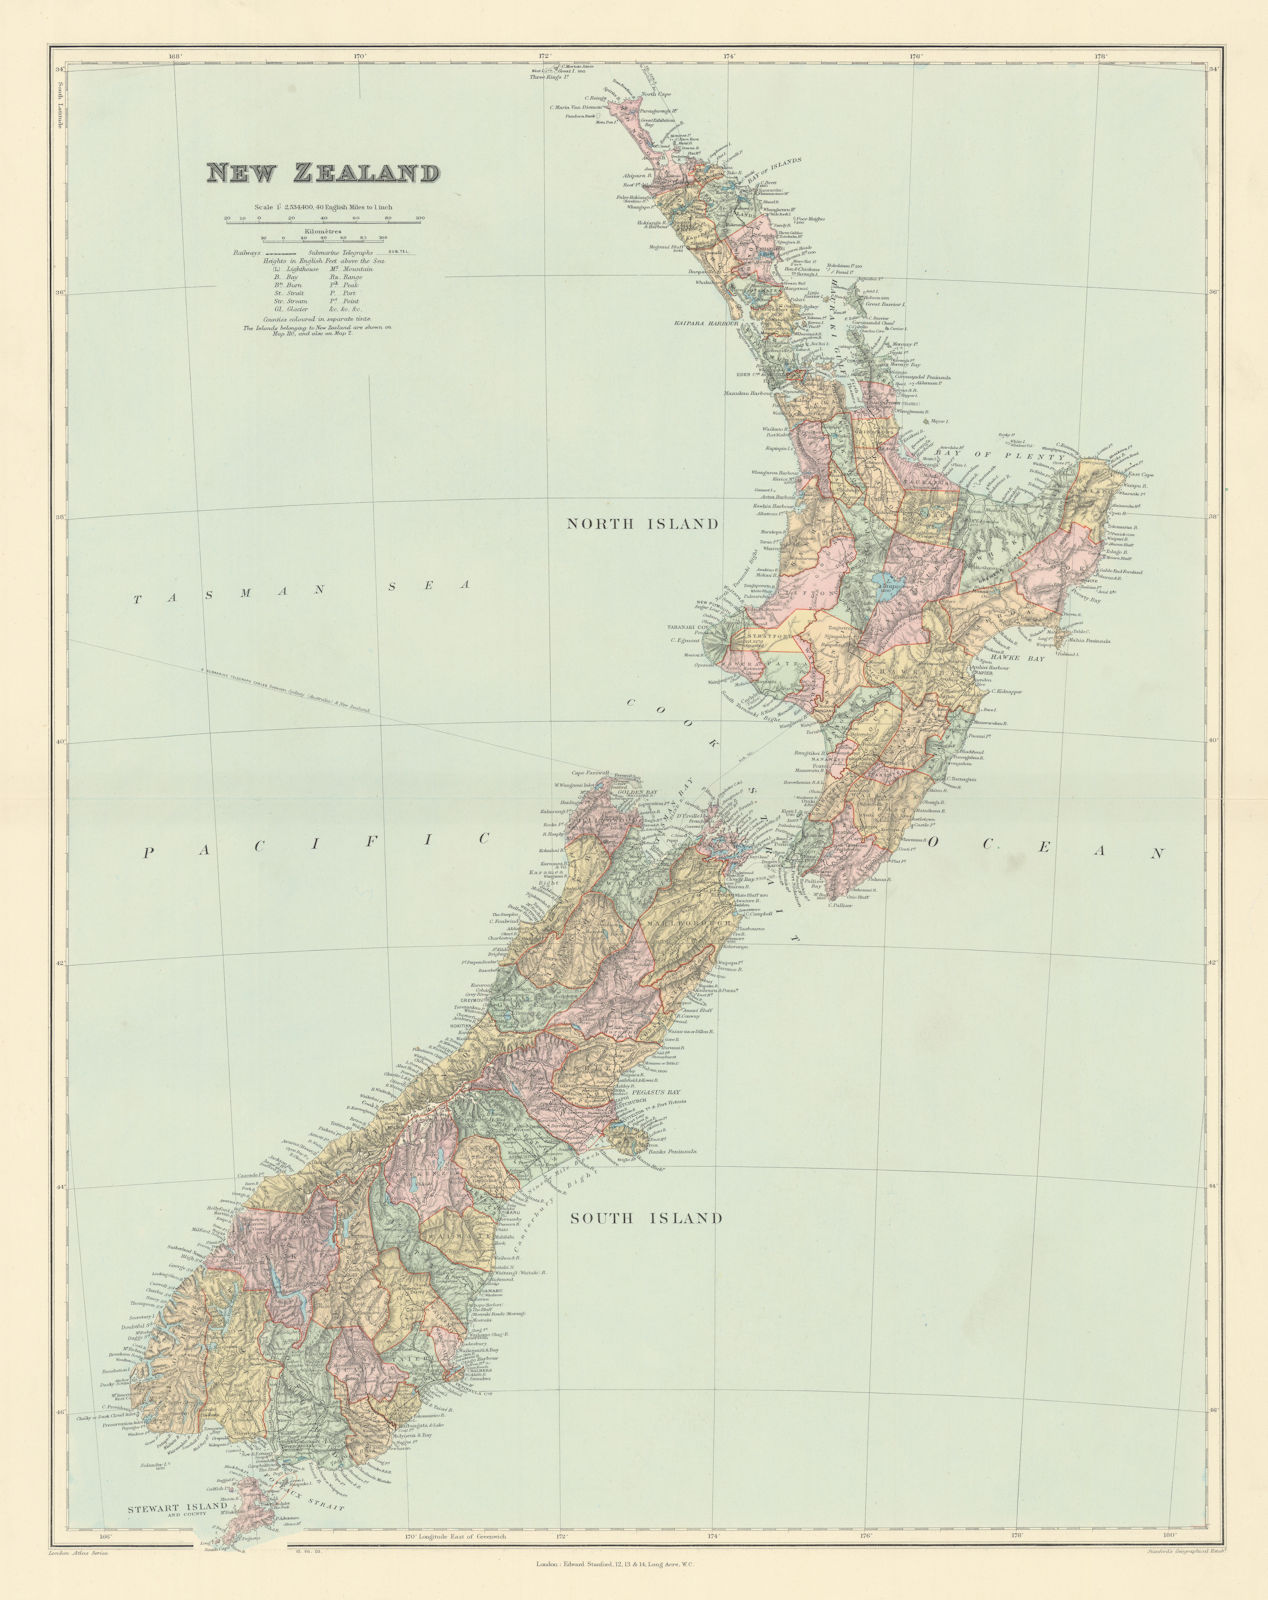 New Zealand. Counties. Railways. Large 64x50cm. STANFORD 1904 old antique map